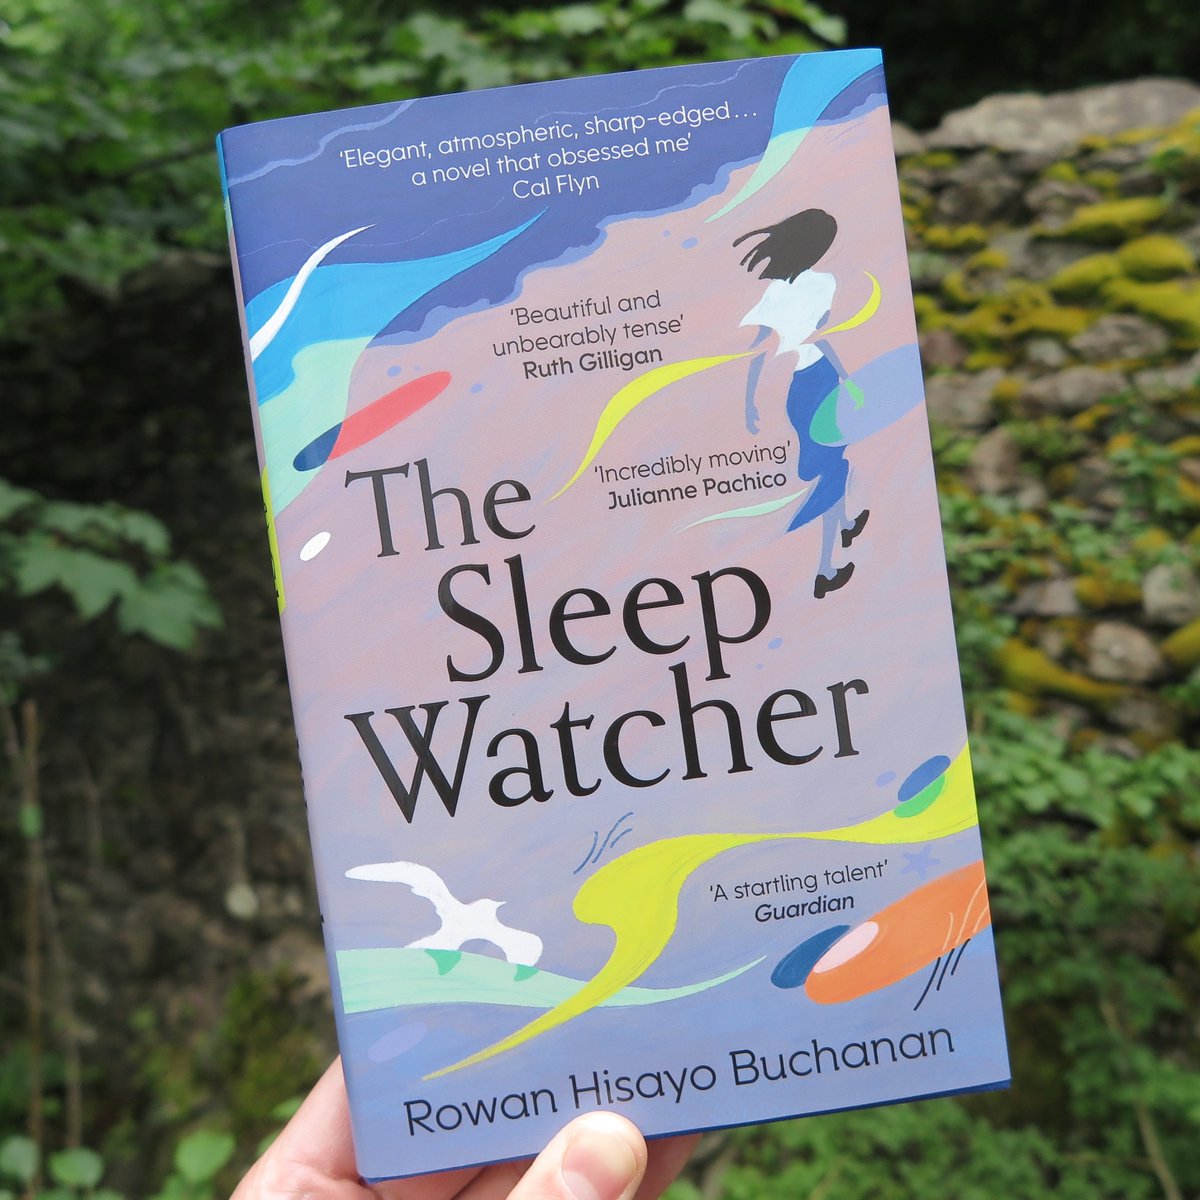 Join us online this evening when @RowanHLB will be in conversation with @pollyrowena about #TheSleepWatcher @SceptreBooks and more. 7.30pm UK time! samreadbooks.co.uk/product/the-sl…